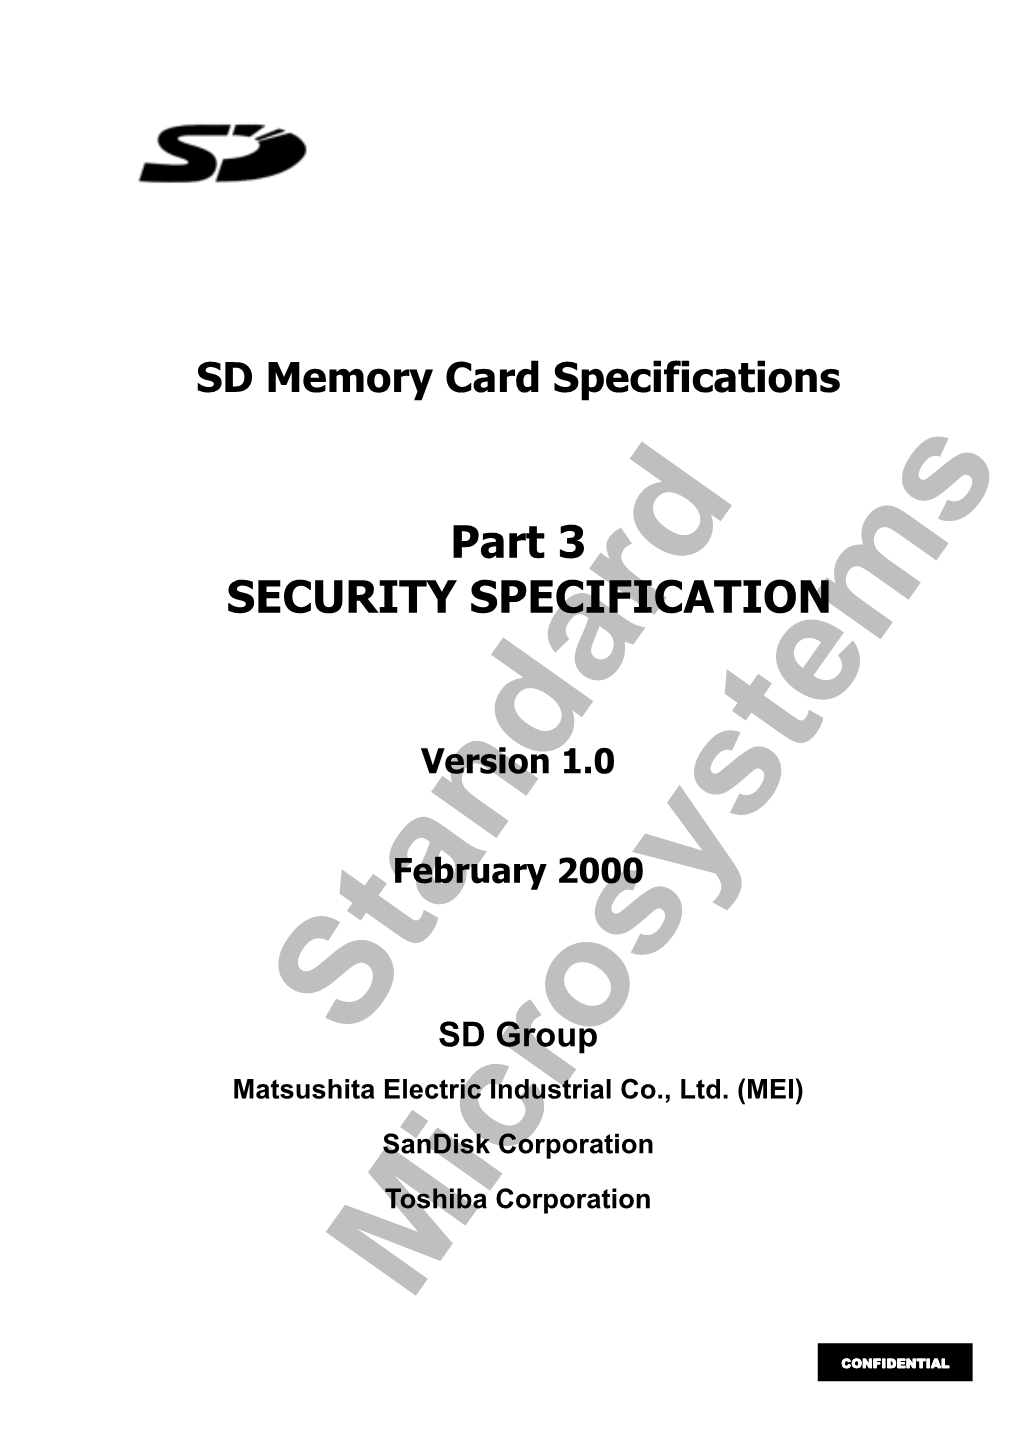 Part 3 SECURITY SPECIFICATION